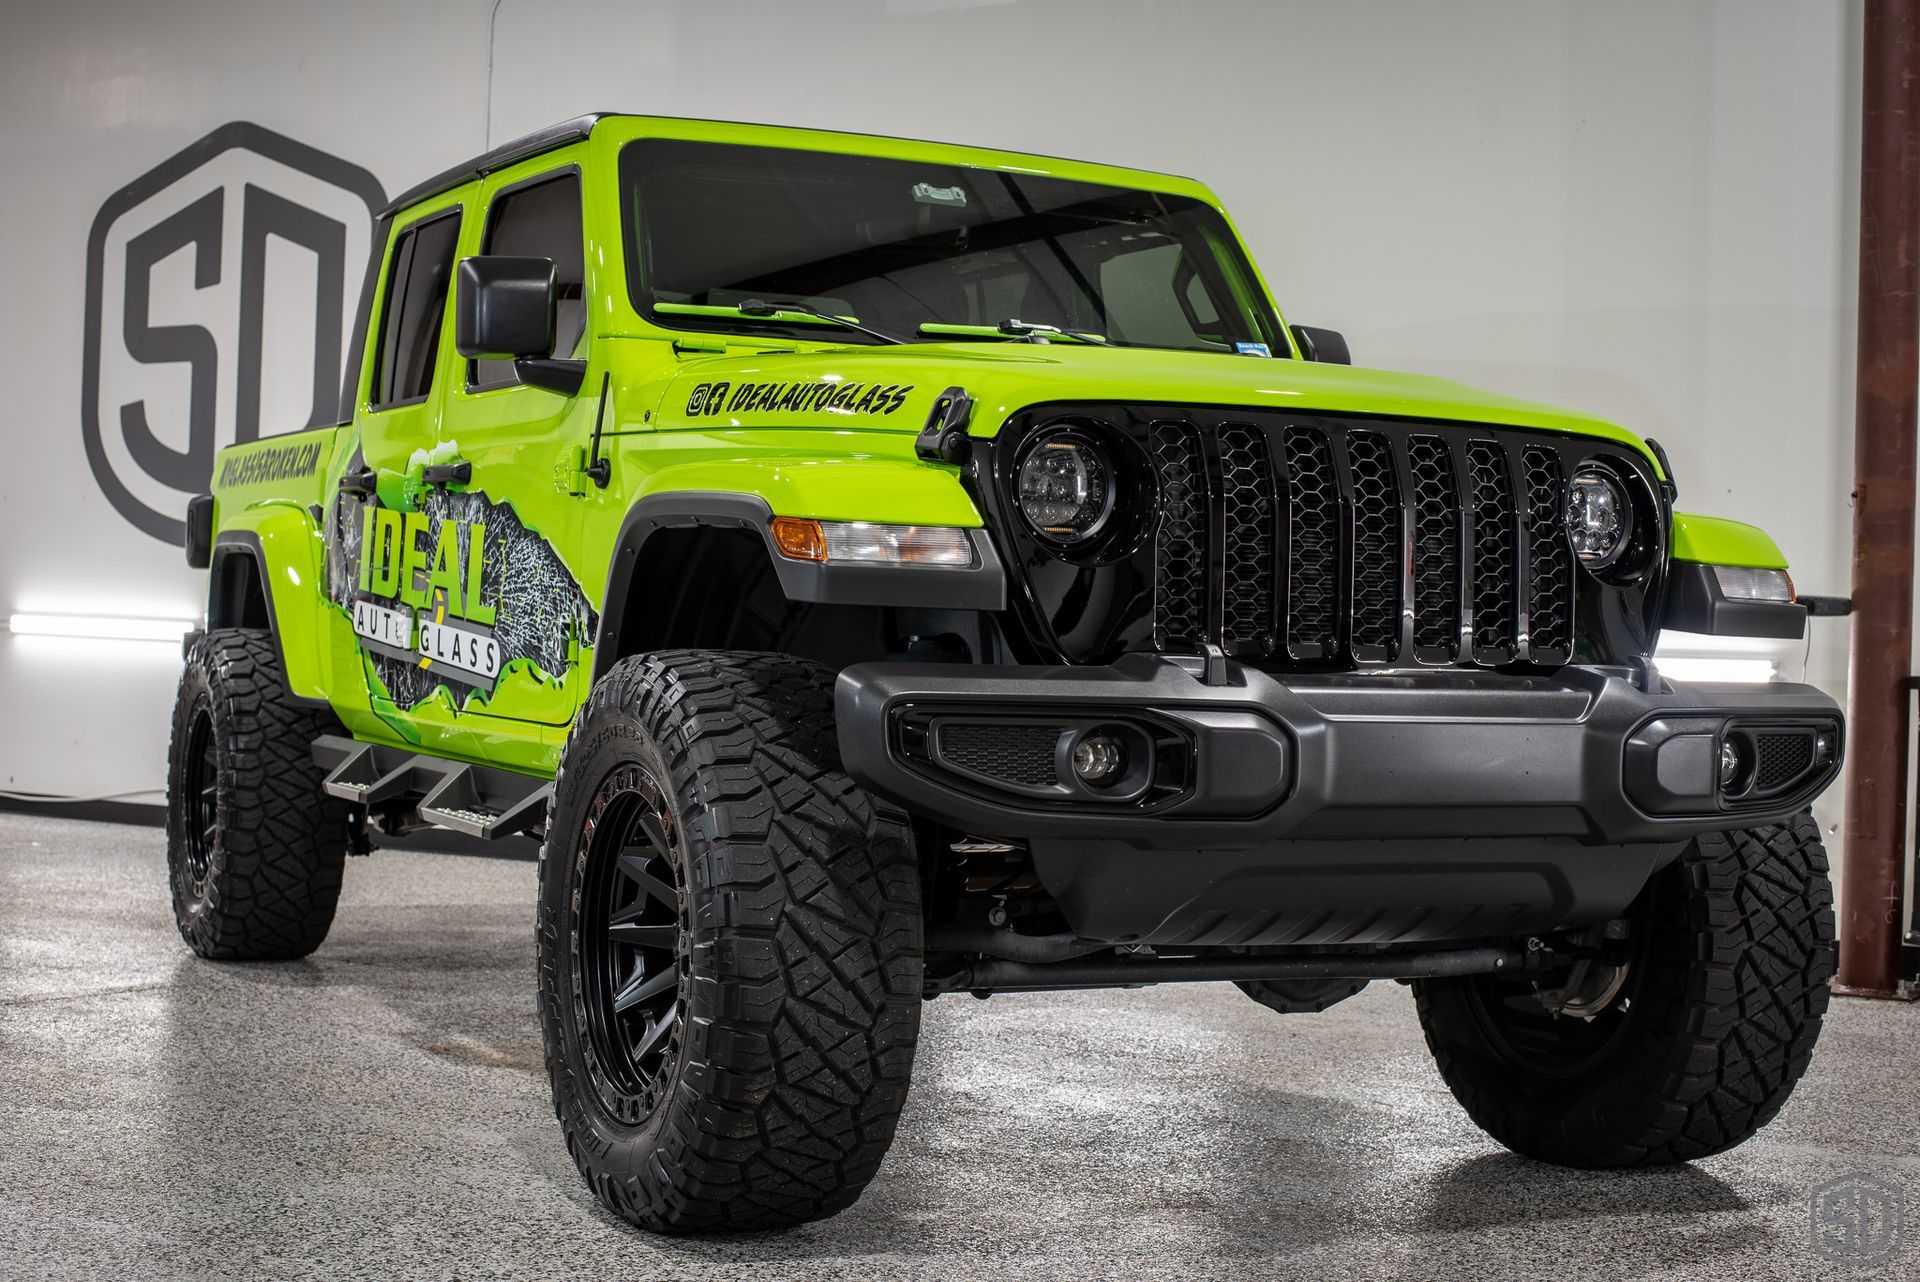 Jeep Gladiator Full Detail, PPF, Modesta Coatings to the Paint and Wheels Orlando, Florida USA